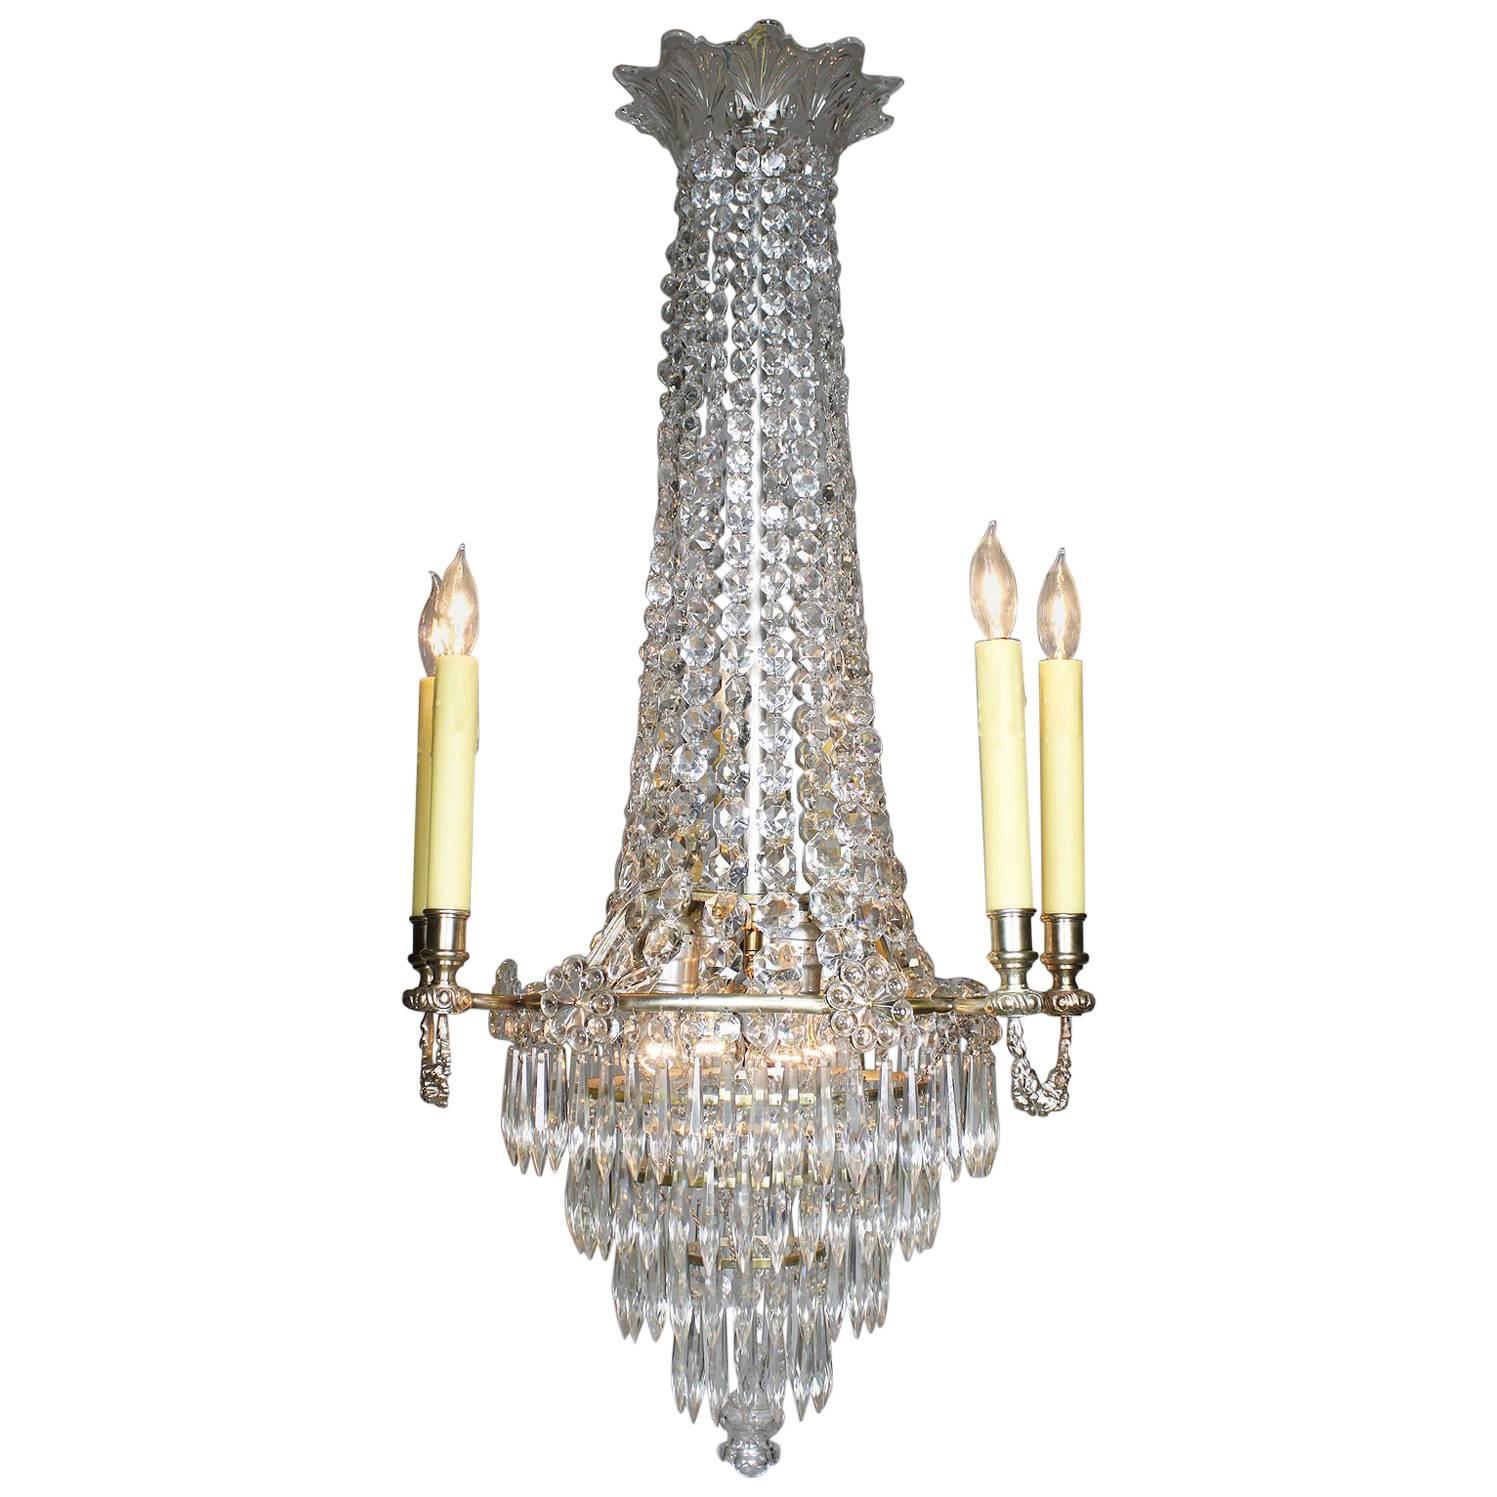 French 19th-20th Century Louis XVI Style Silvered Bronze & Cut-Glass Chandelier For Sale